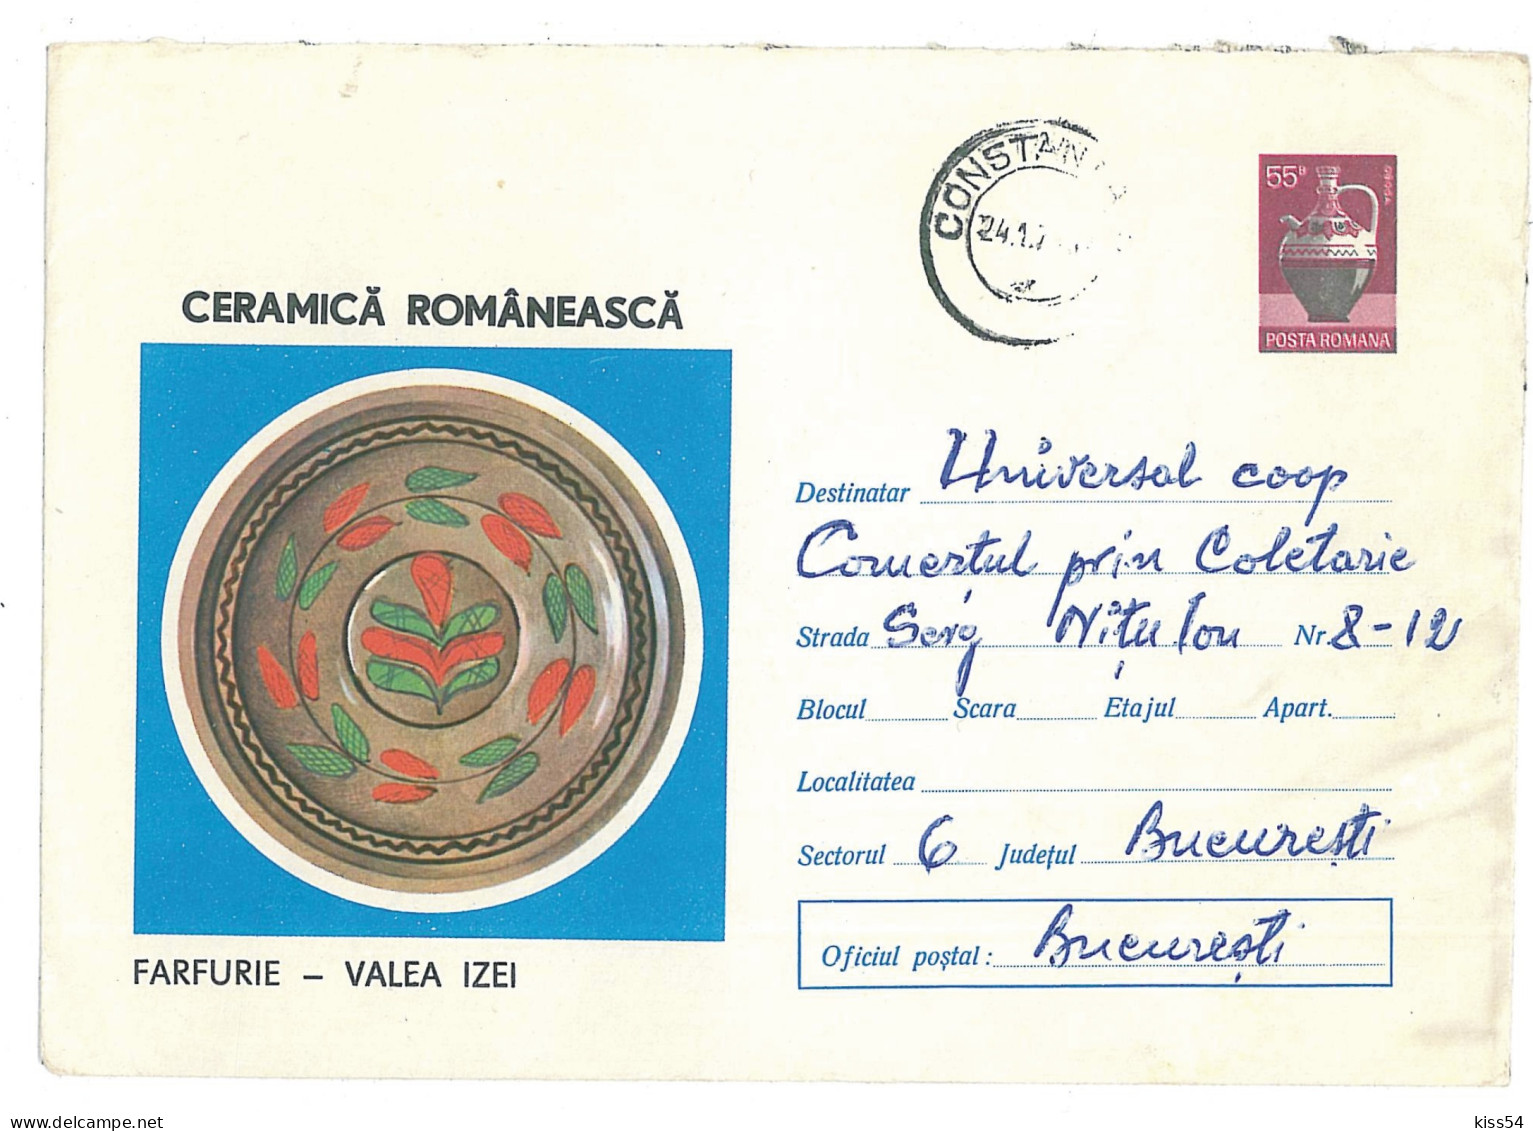 IP 73 A - 01236 POTTERY, Romania - Stationery - Used - 1973 - Porcelain